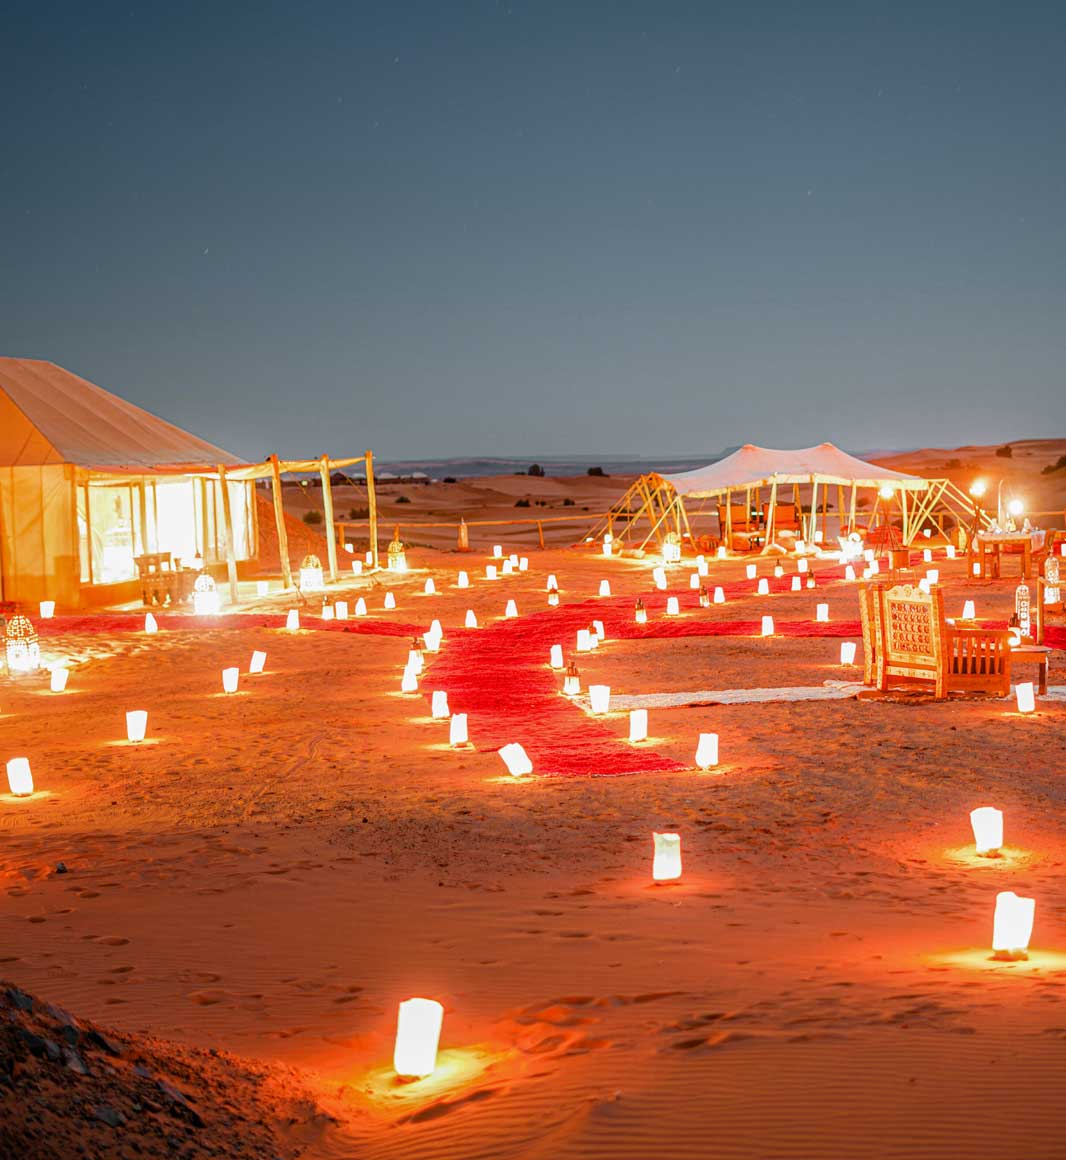 Luxury private camp set up in Sahara Desert in Morocco